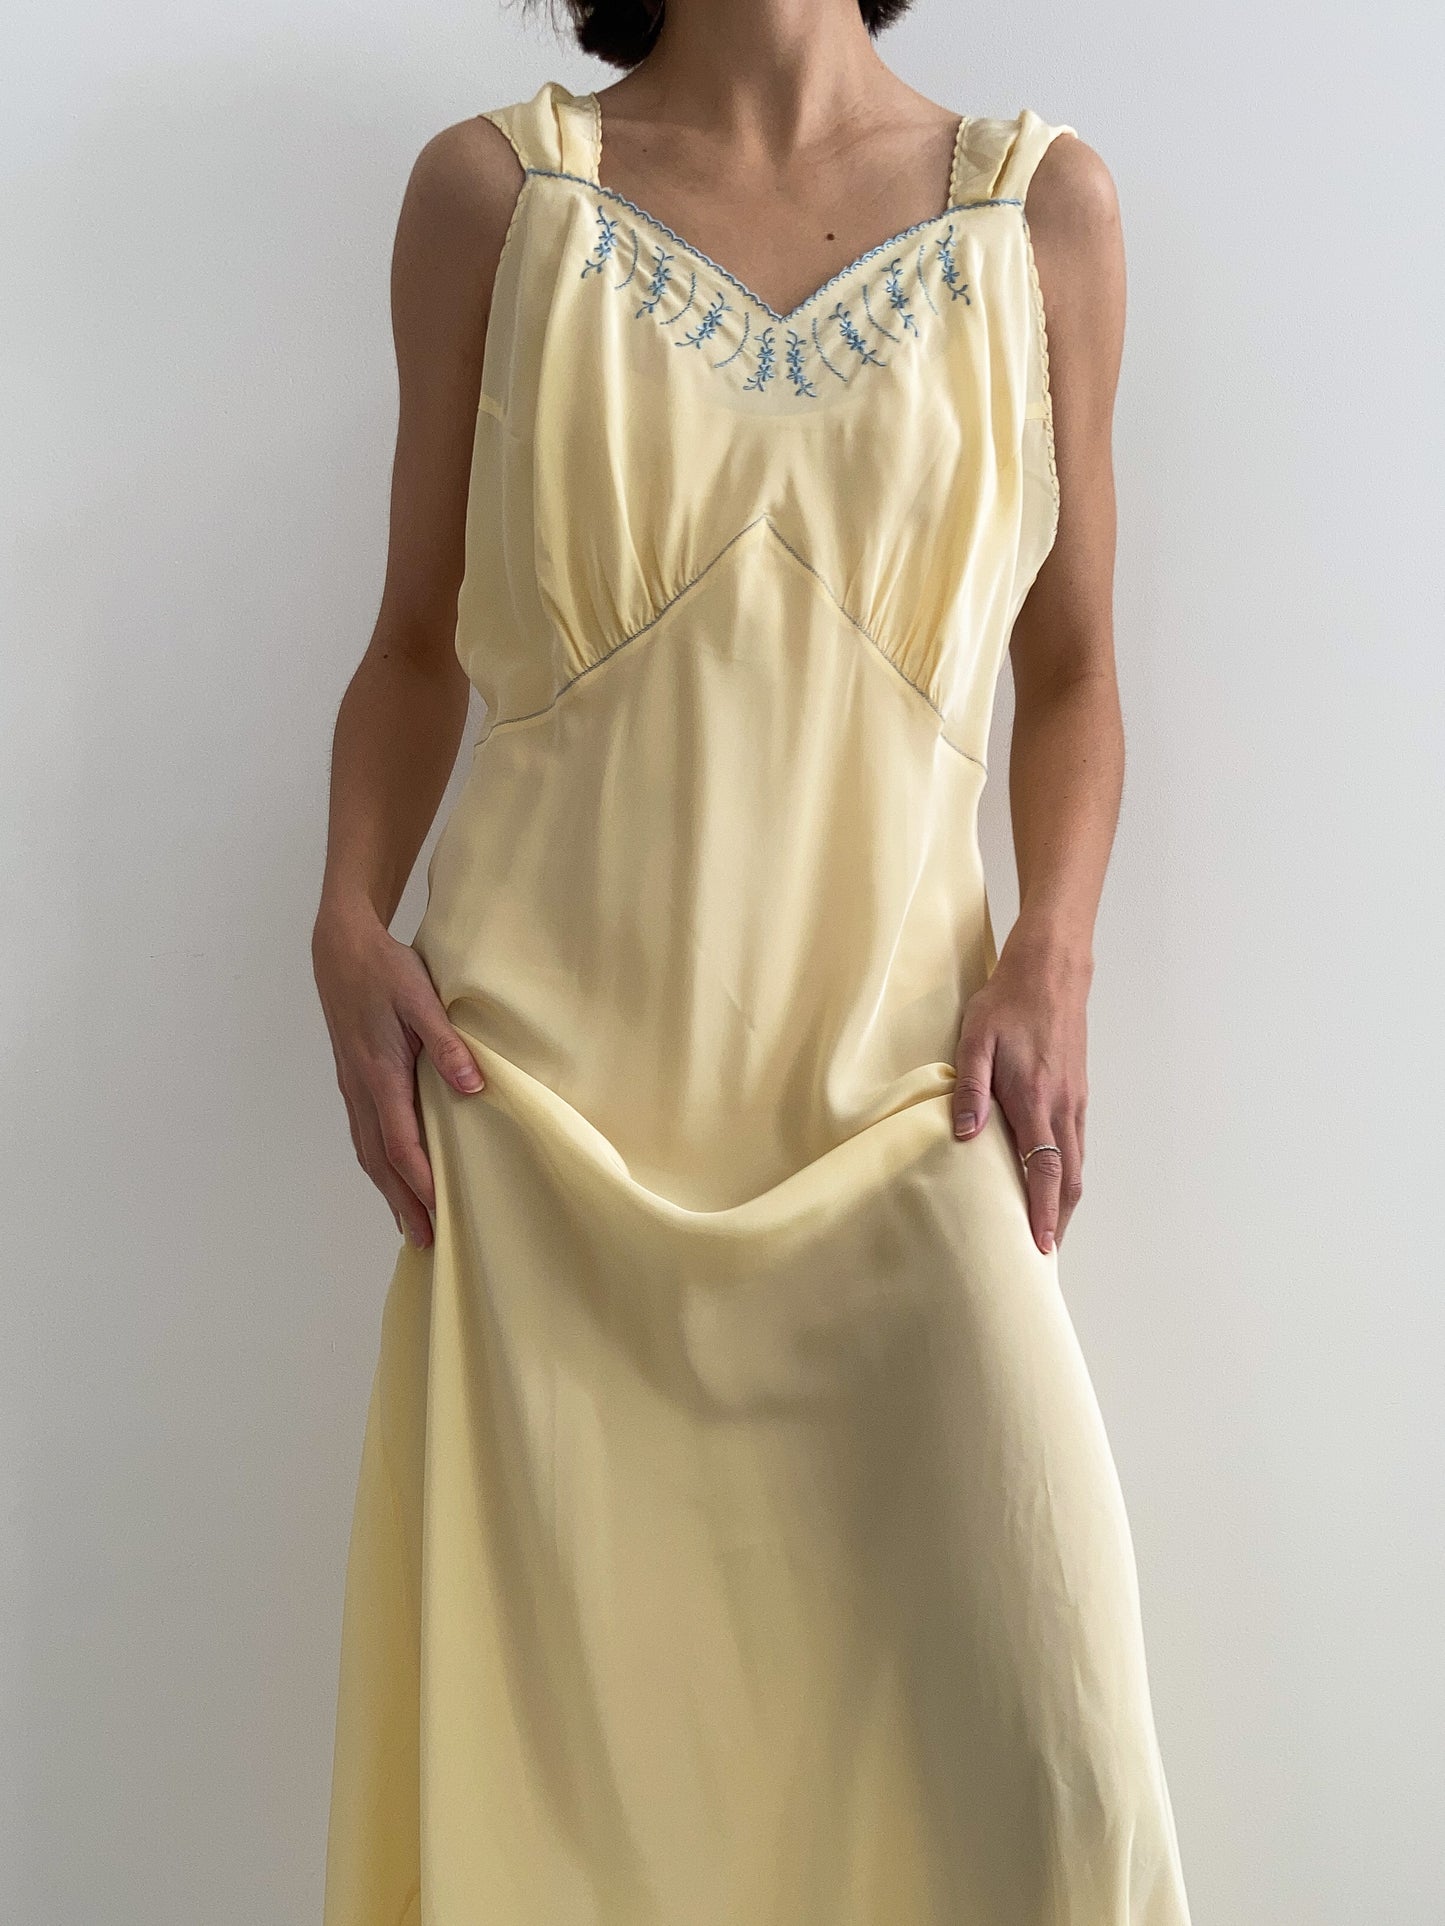 1930s Buttercream Slip with Blue Embroidery